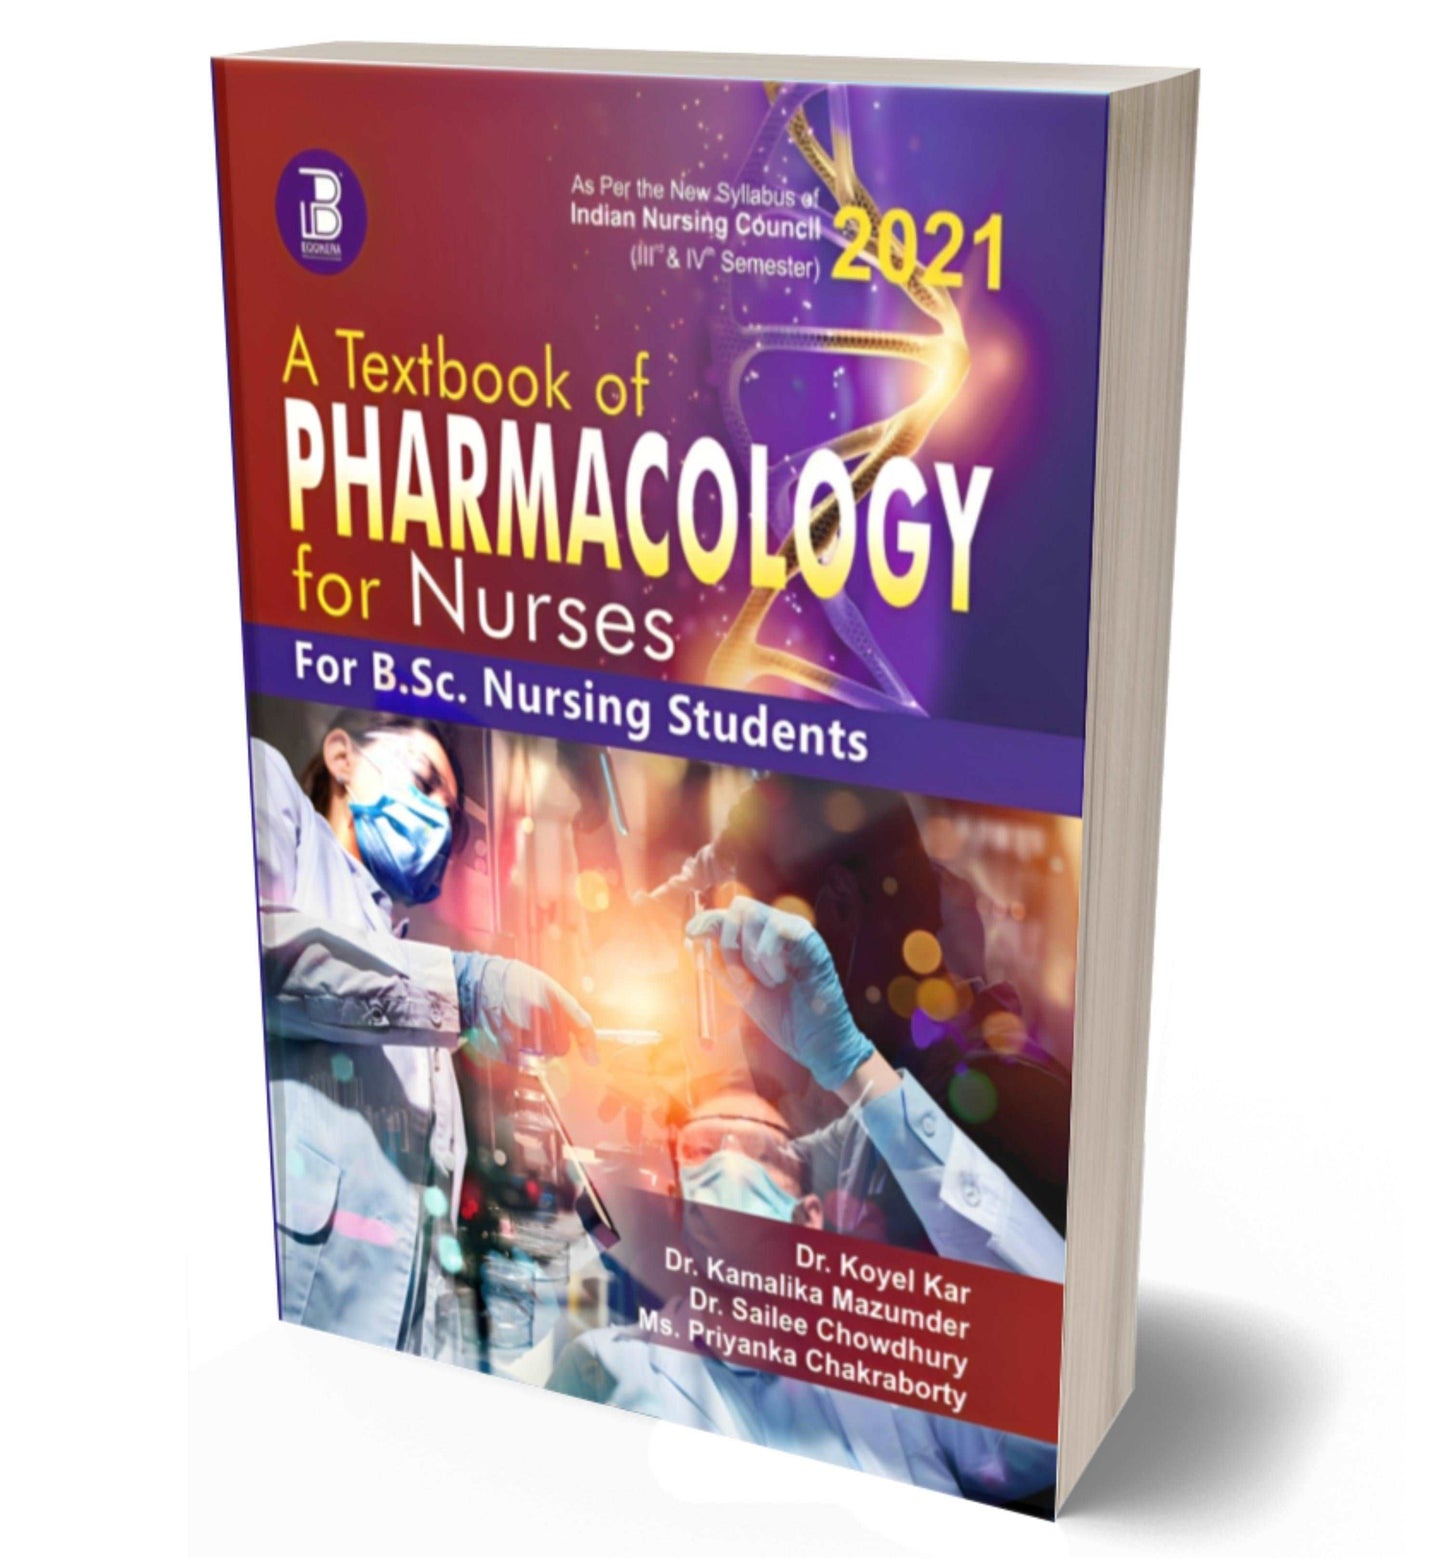 A Textbook of Pharmacology for Nurses